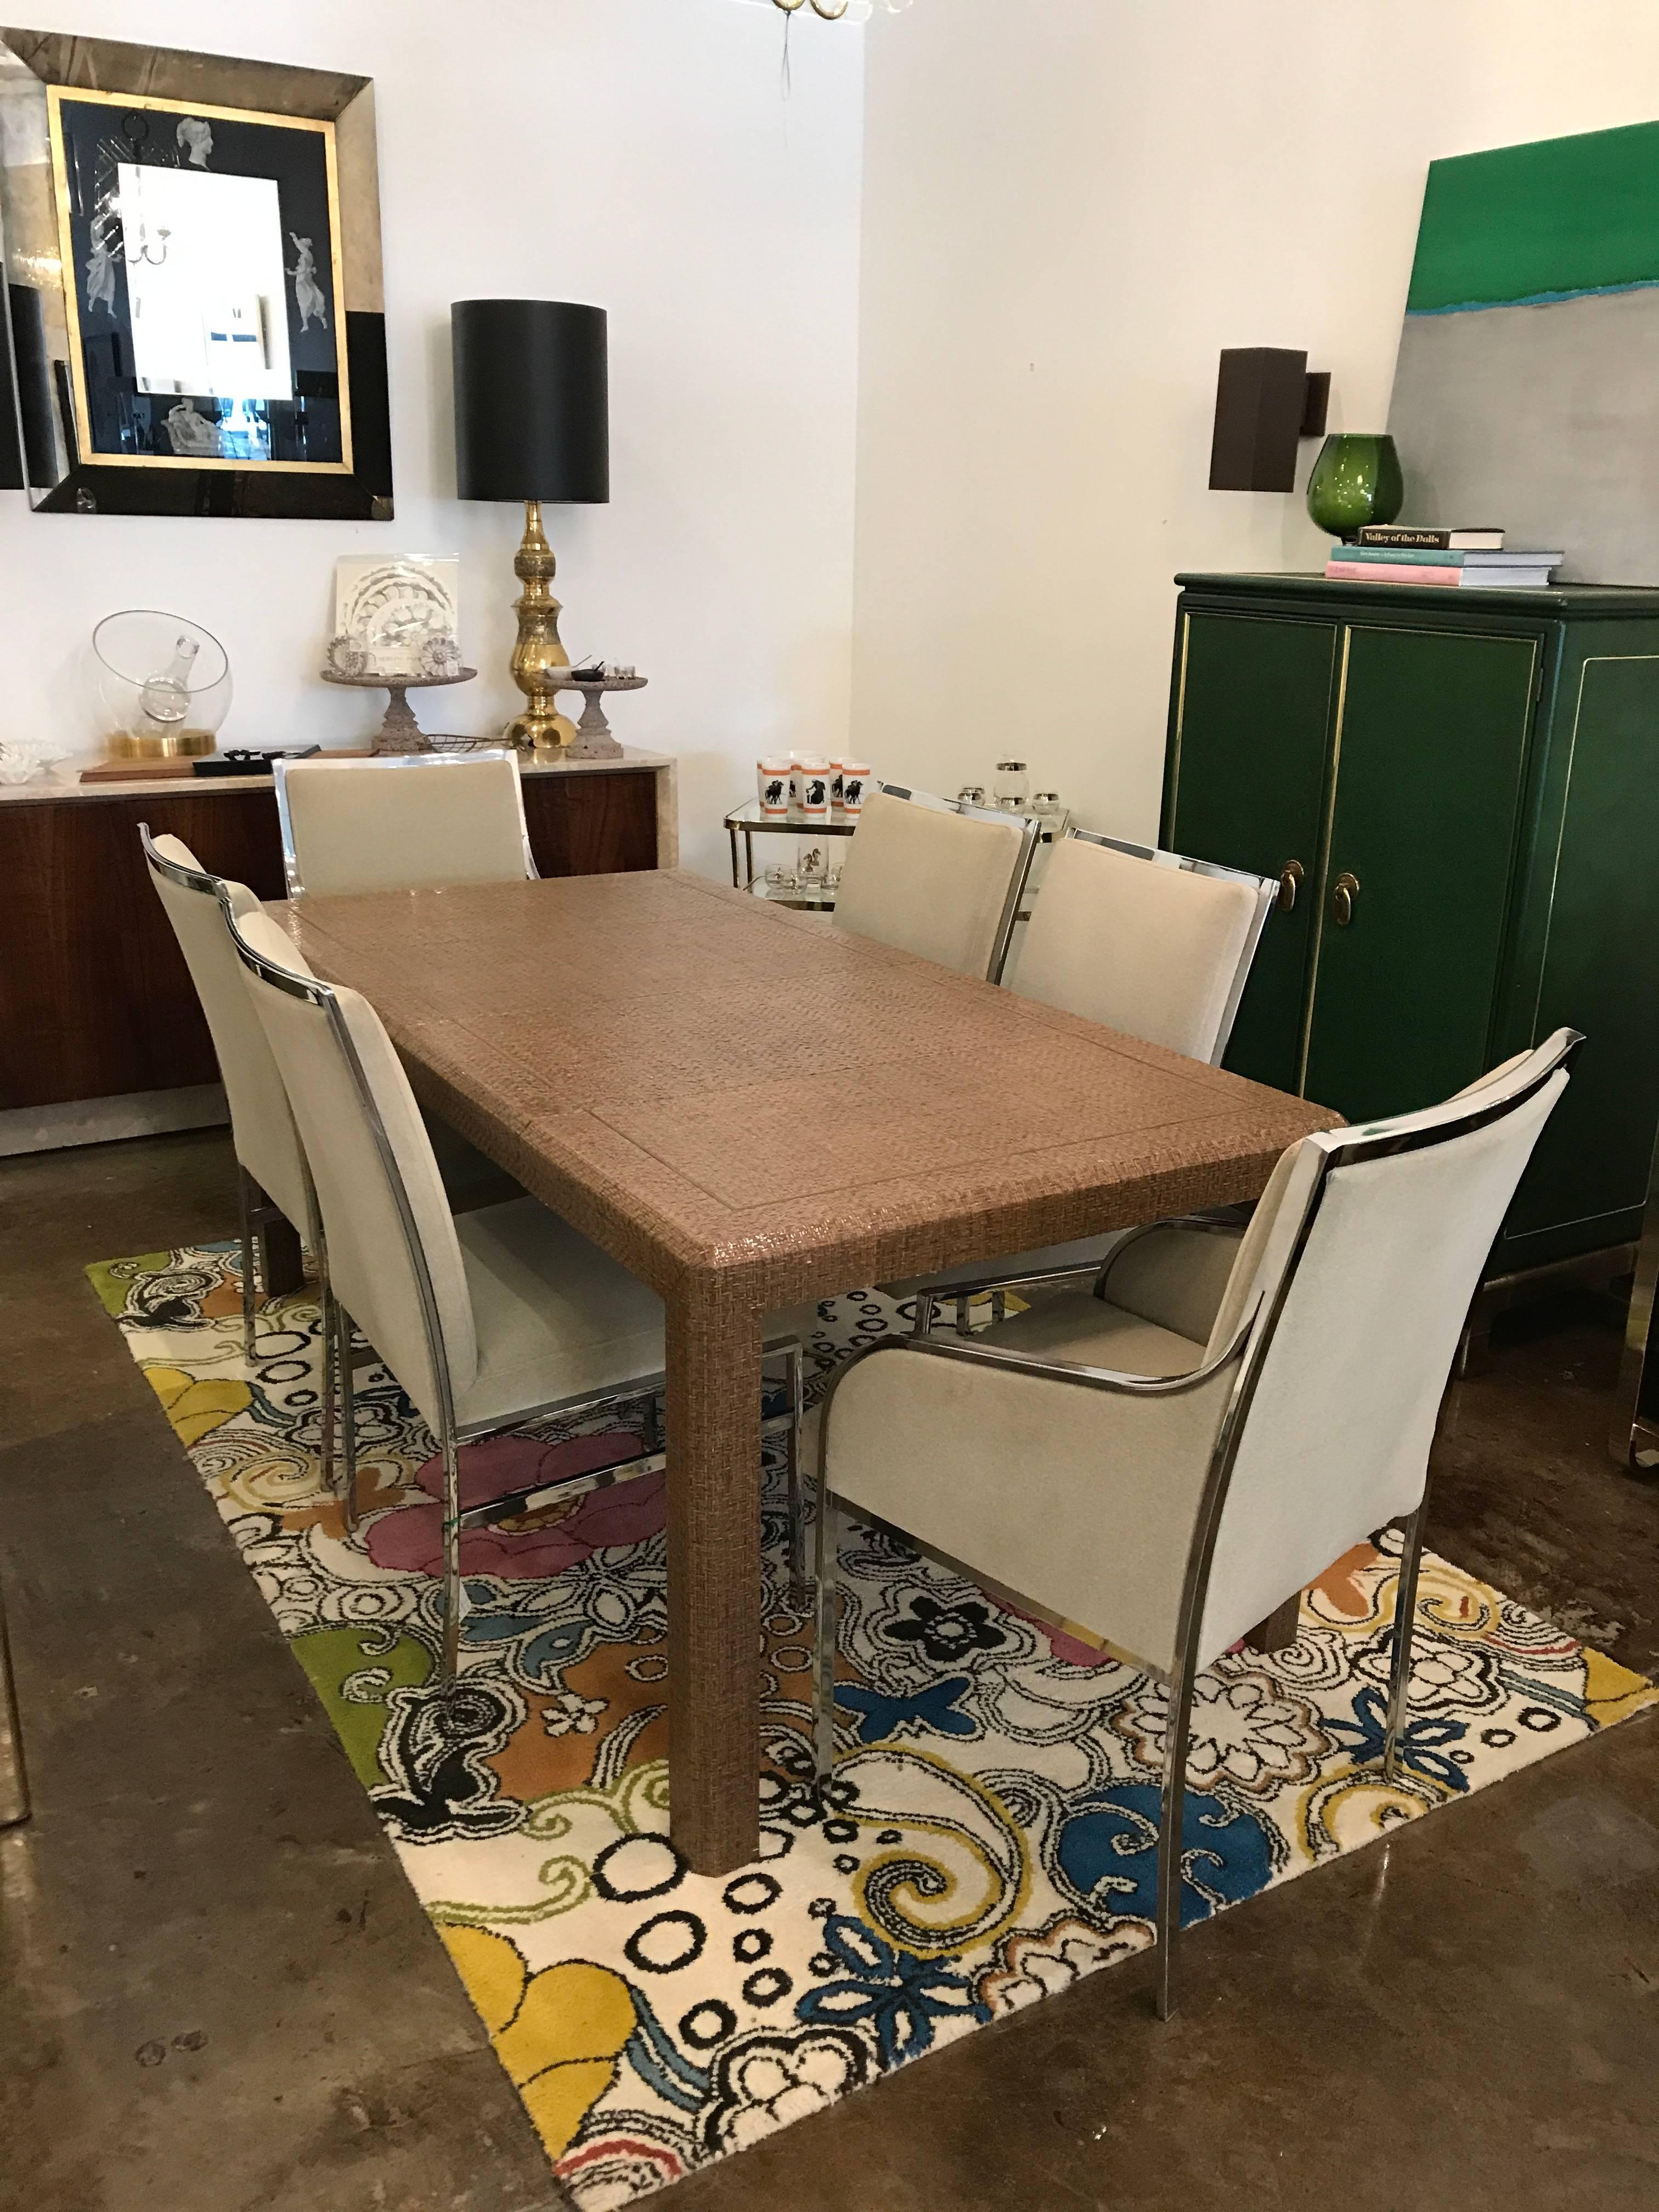 Stunning gracious lacquered wicker, raffia and/or rattan game table with inlaid brass. Add two matching leaves and you have a dining table. Great for tighter spaces where a place setting for four is the practical use. However, for those times that